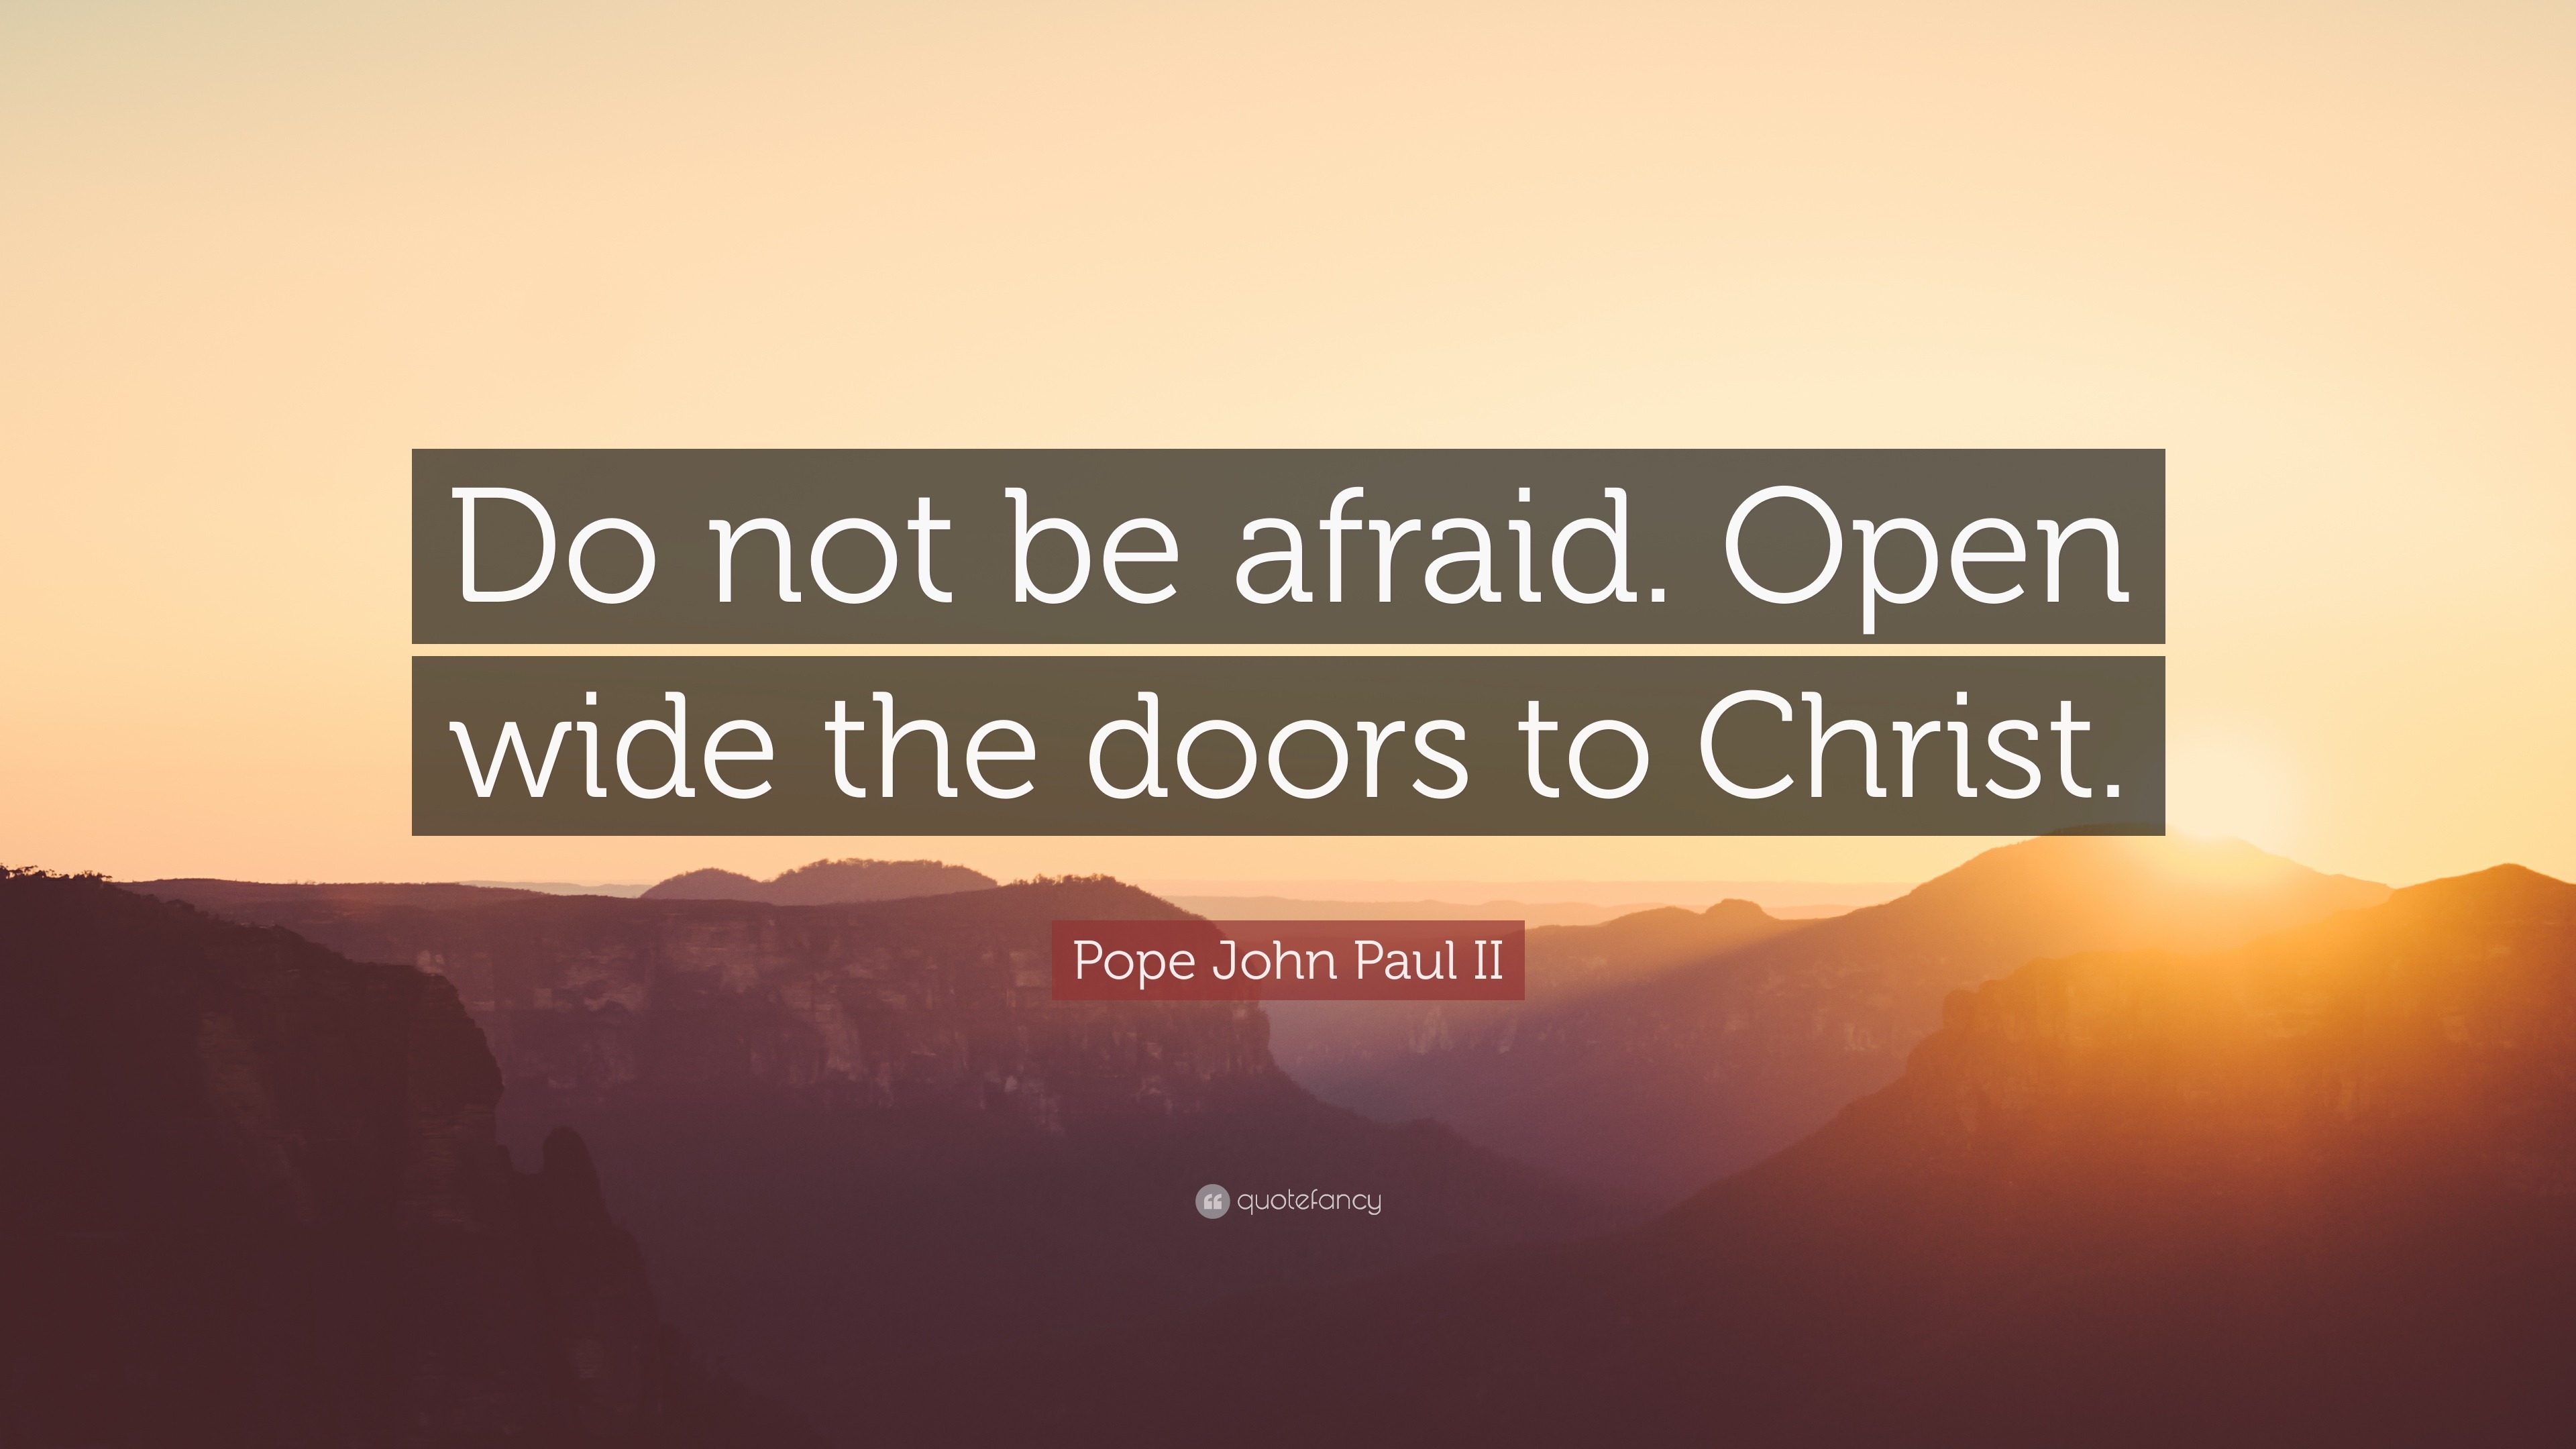 Pope John Paul II Quote: “Do not be afraid. Open wide the doors to Christ.”